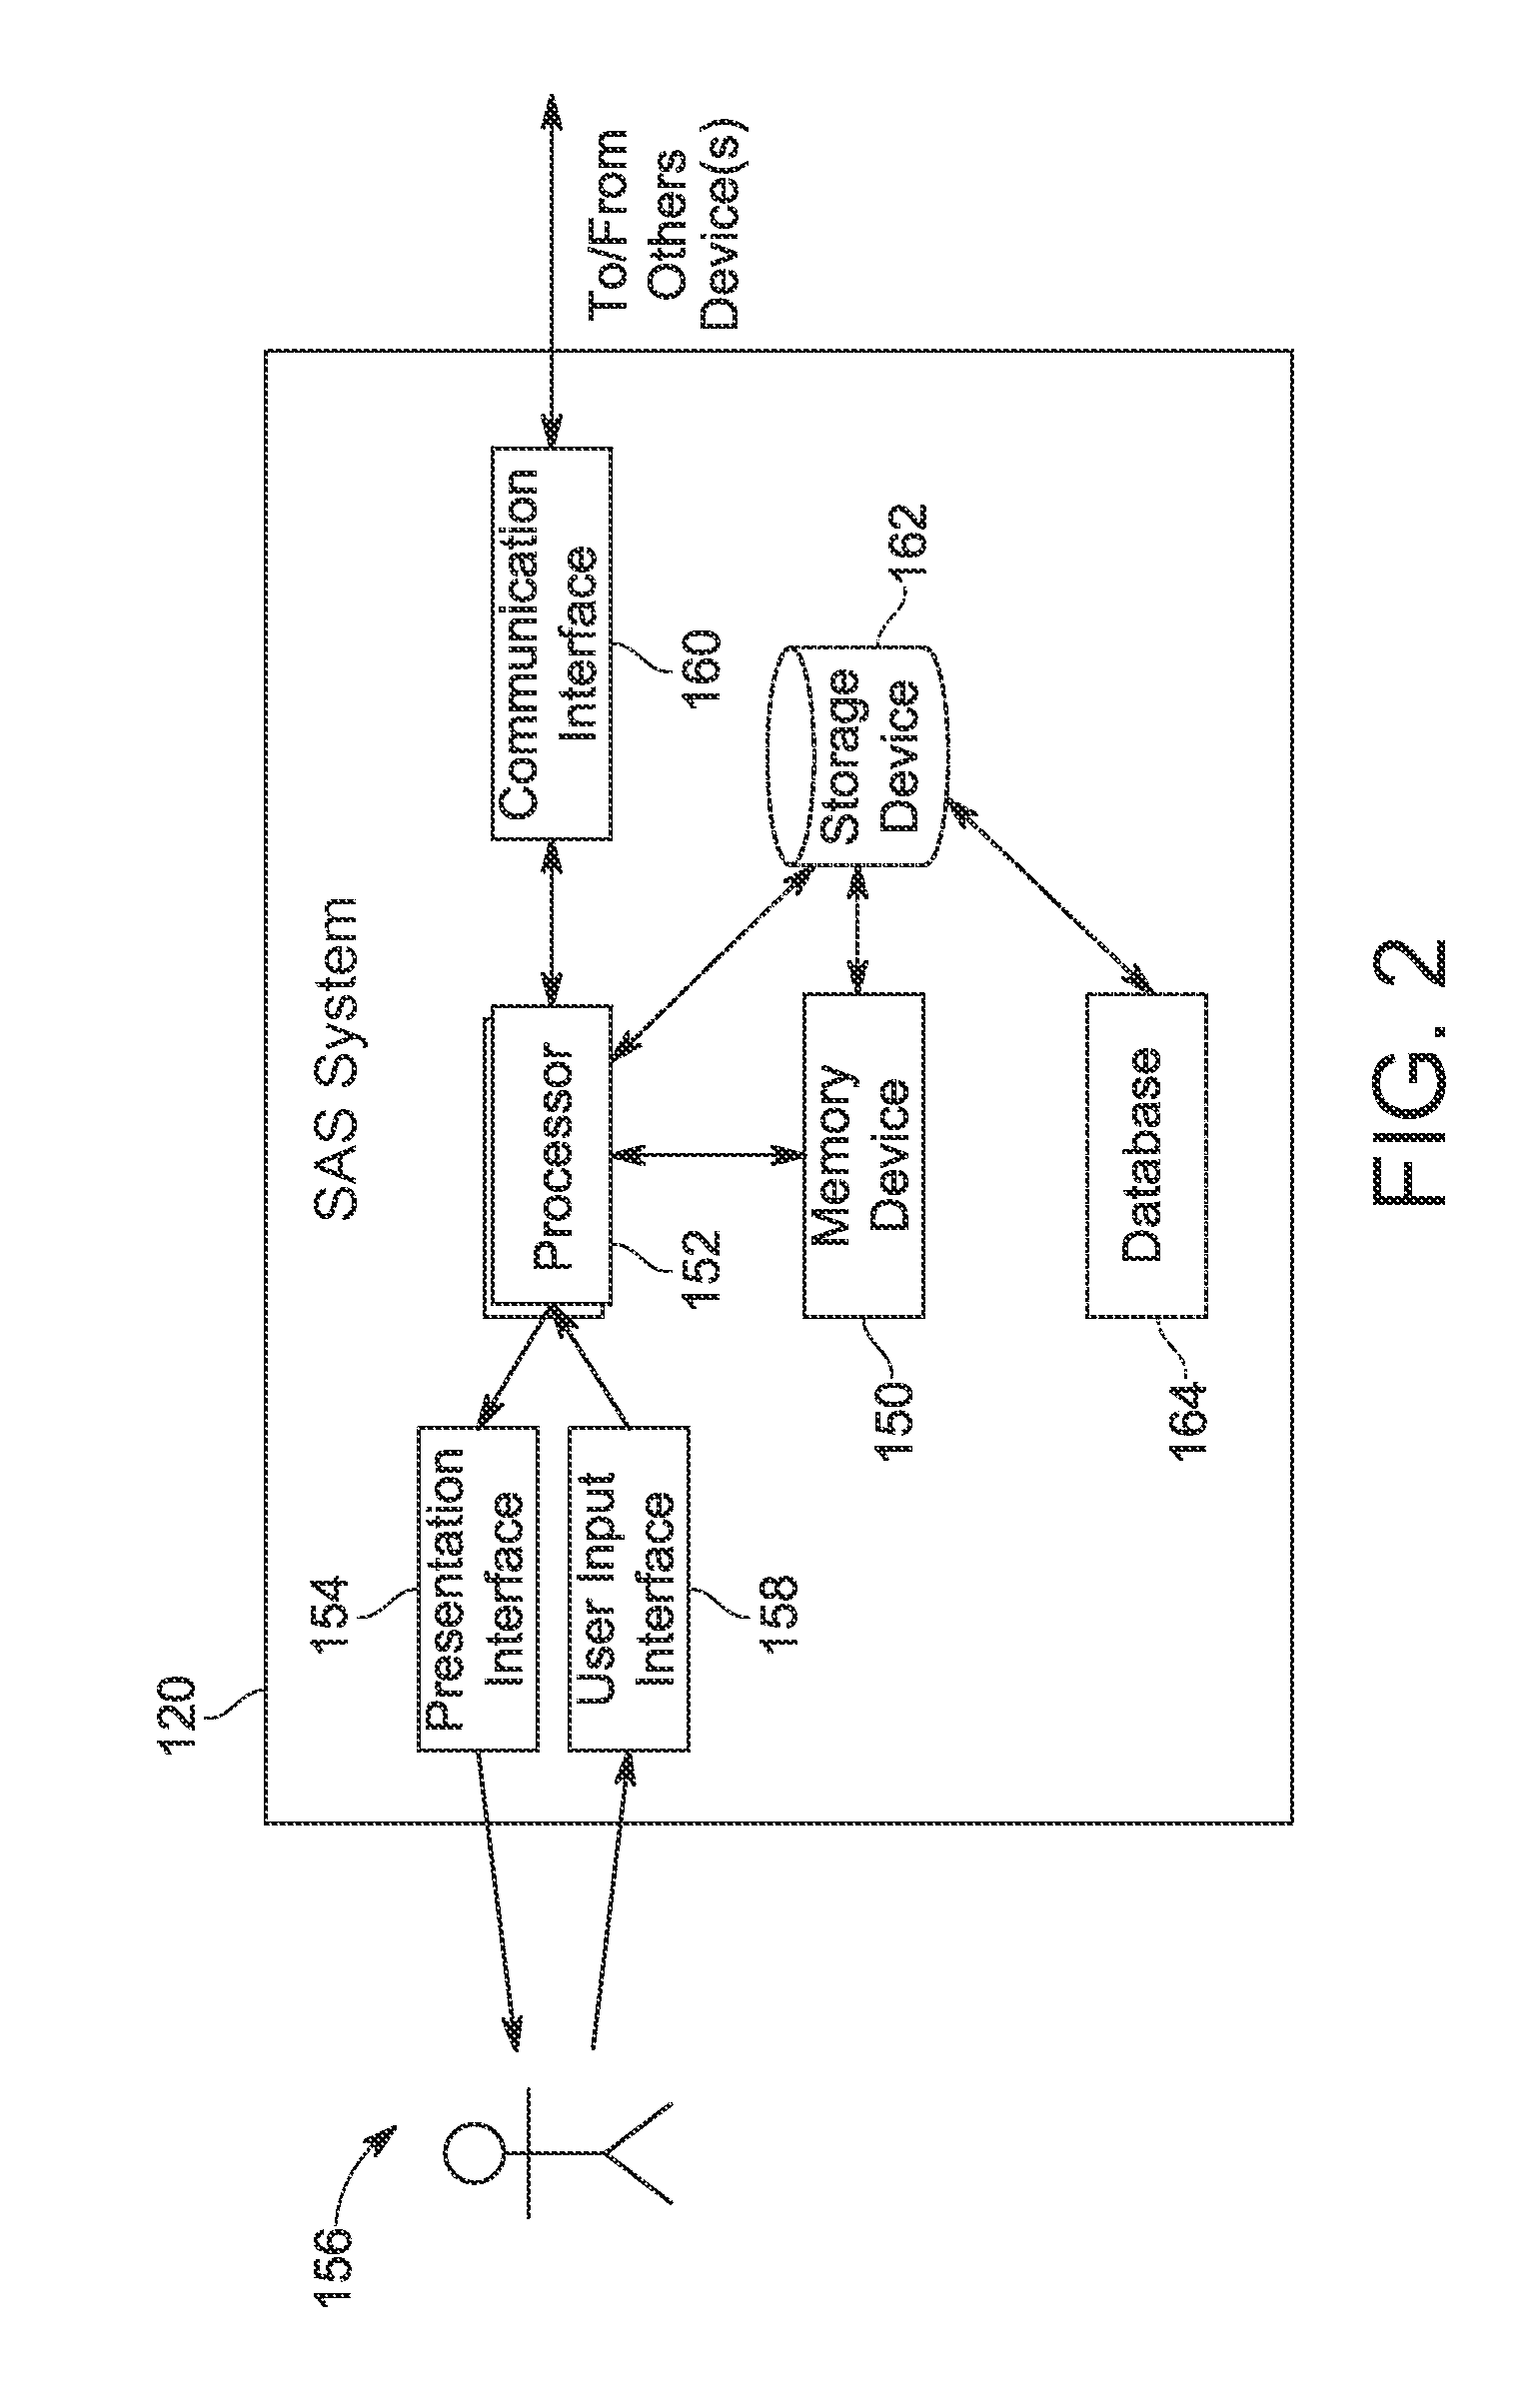 System and method for non-invasive generator damping torque estimation